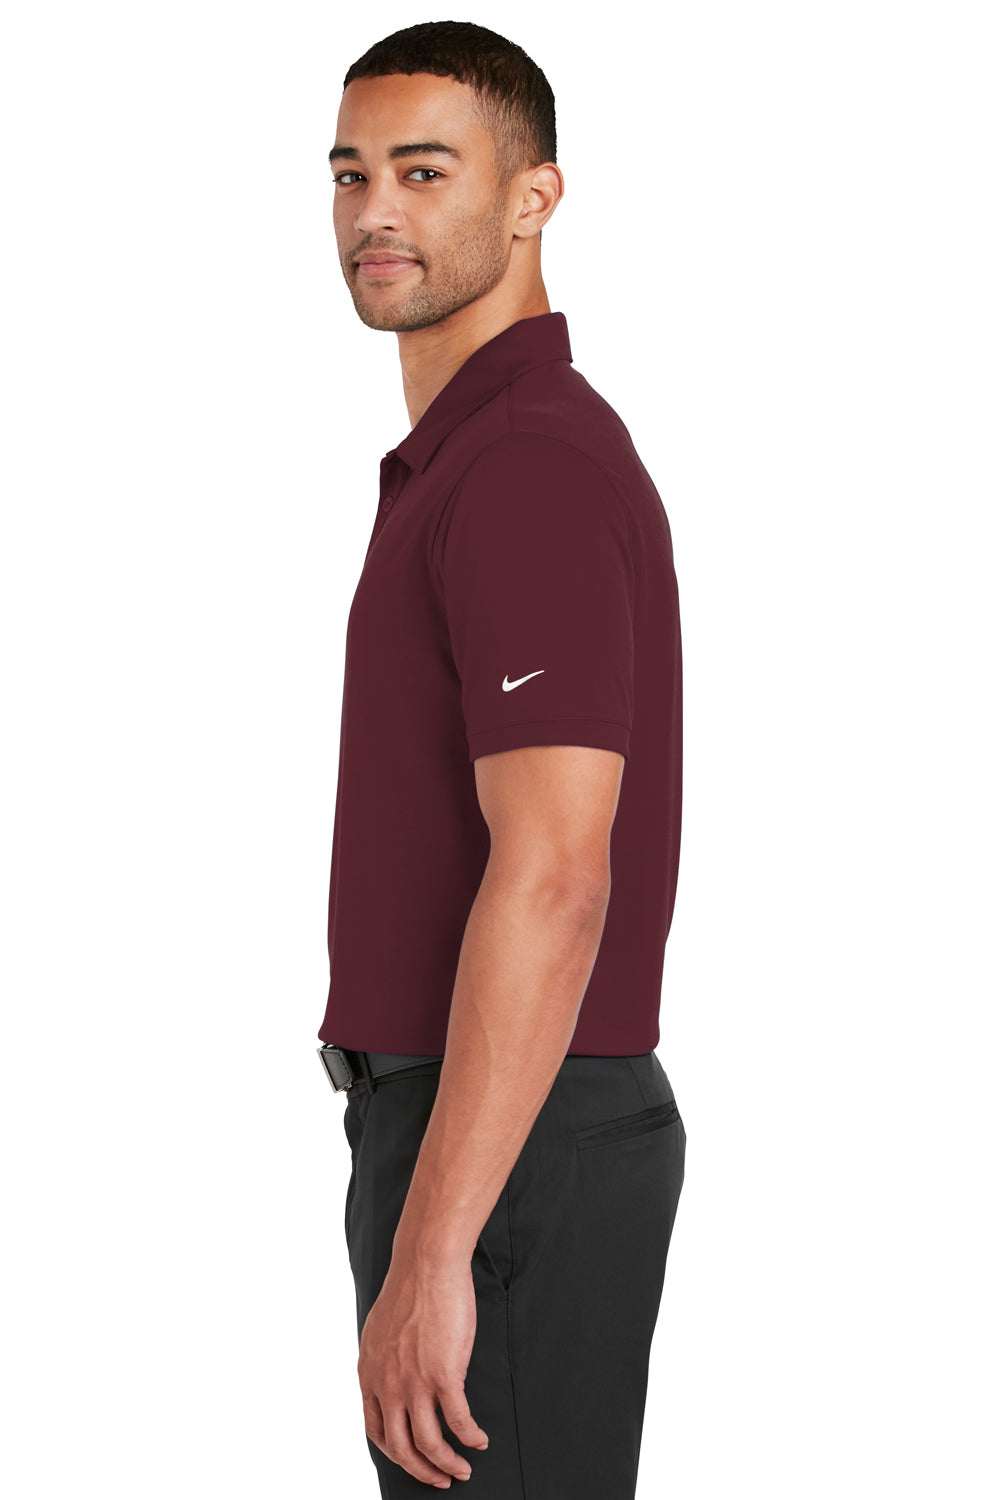 Nike 799802 Mens Players Dri-Fit Moisture Wicking Short Sleeve Polo Shirt Team Red Model Side